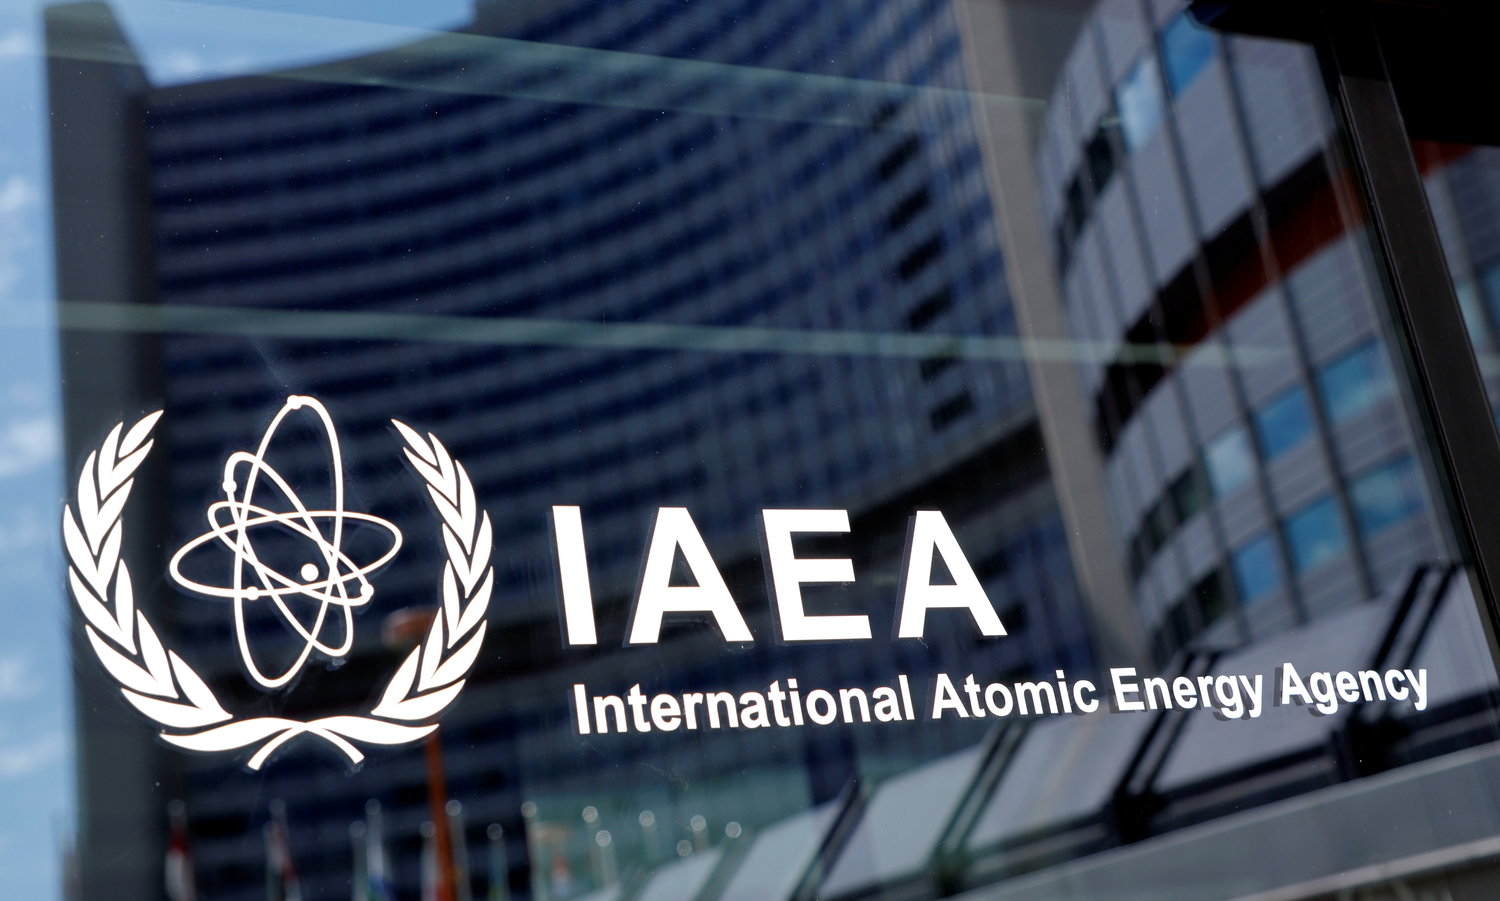 The logo of the International Atomic Energy Agency (IAEA) is seen at their headquarters during a board of governors meeting, amid the coronavirus disease (COVID-19) outbreak in Vienna, Austria, June 7, 2021. REUTERS/Leonhard Foeger